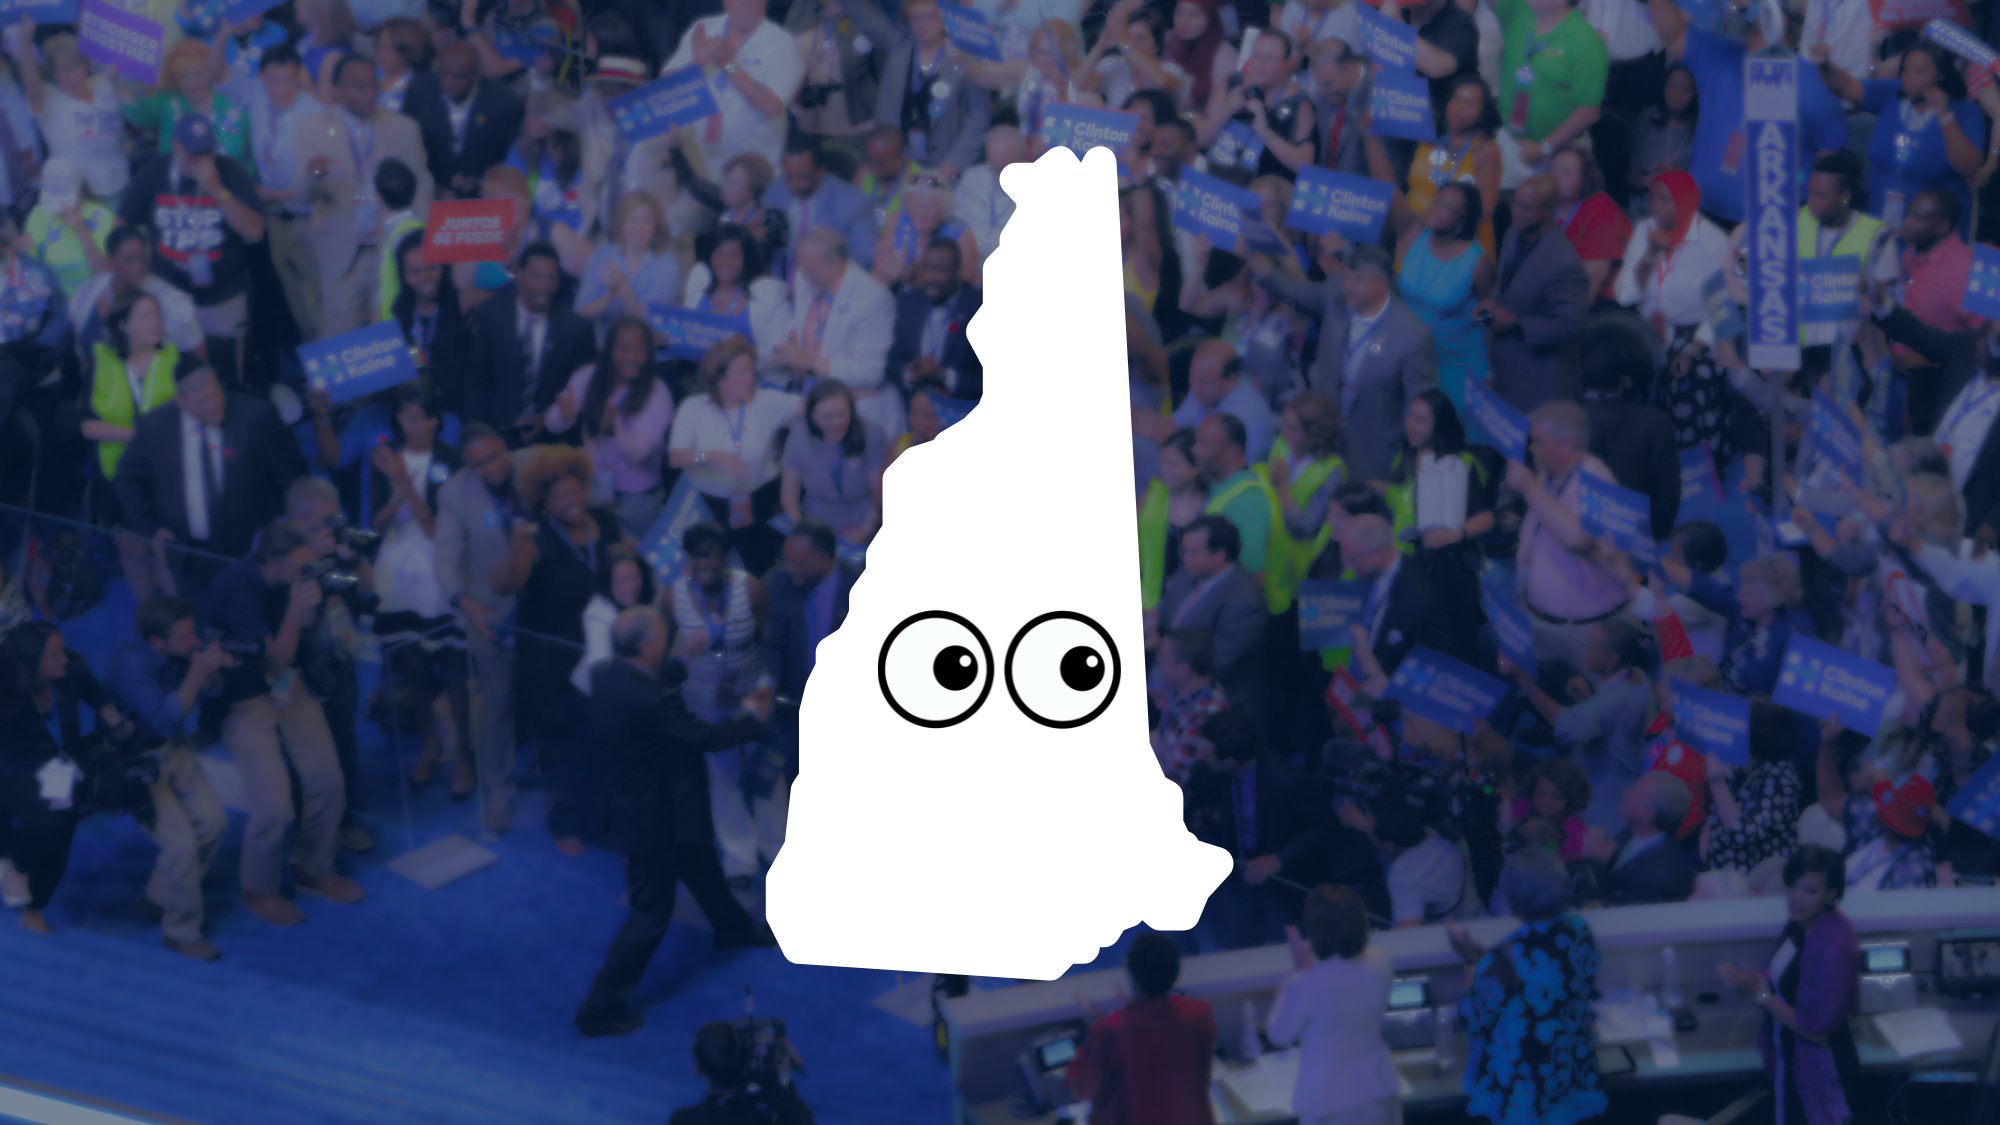 Graphic including state of New Hampshire with googly eyes, imposed over crowd shot.